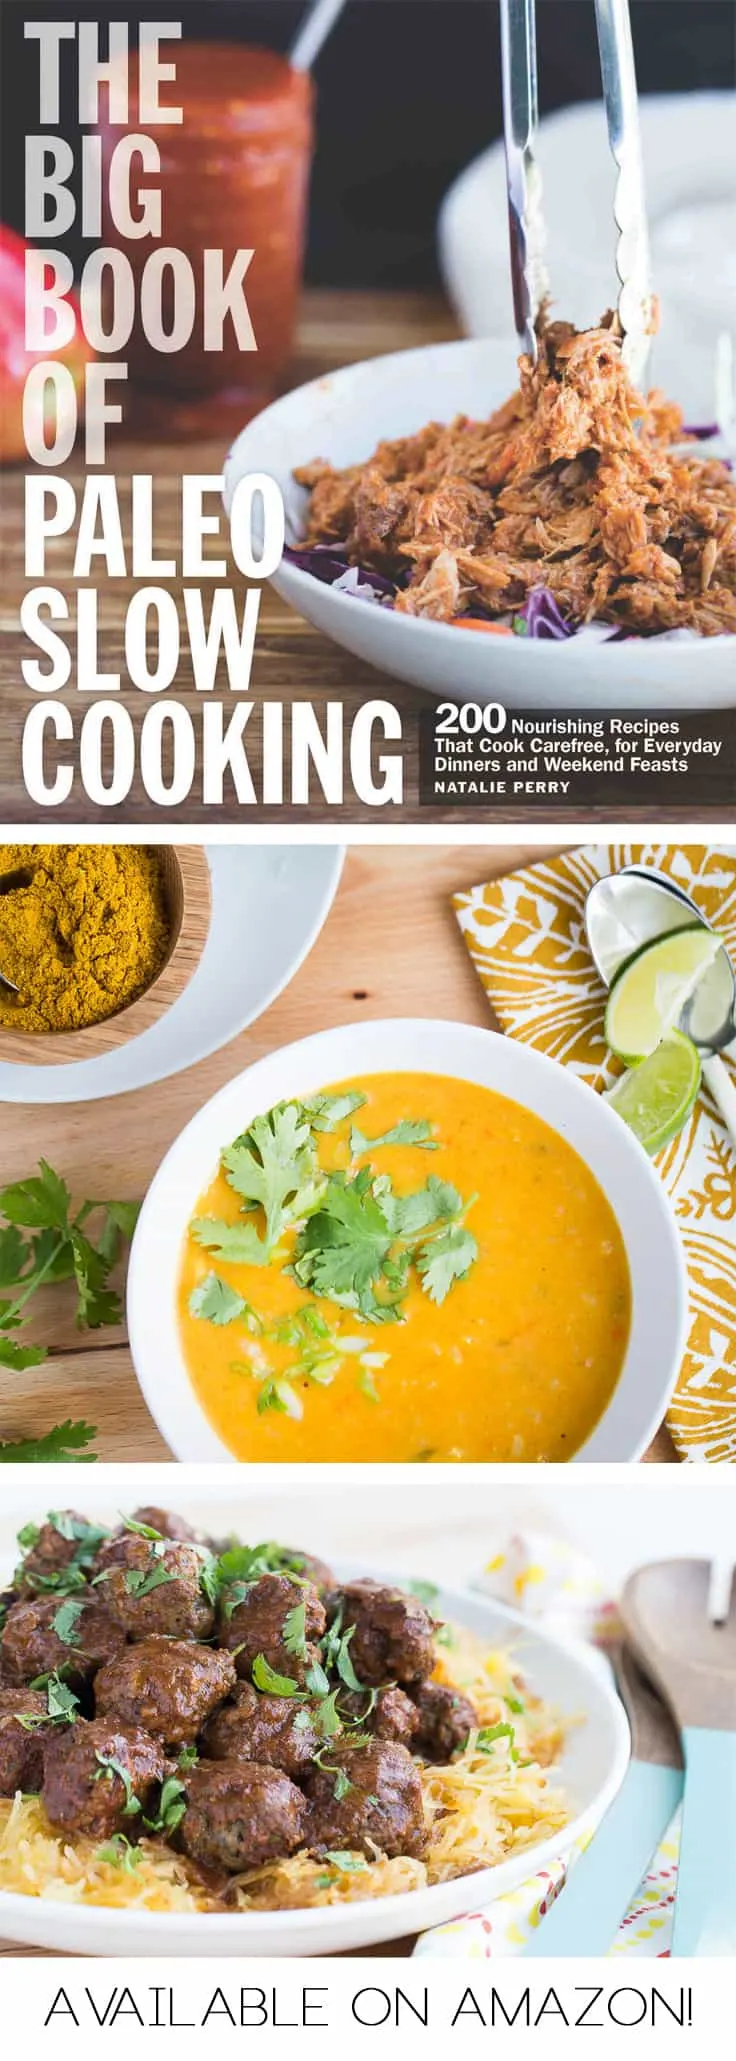 Sneak peeks of The Big Book of Paleo Slow Cooking! | Paleo recipes | Whole30 recipes | Crock Pot Recipes | menu planning | meal planning | perrysplate.com